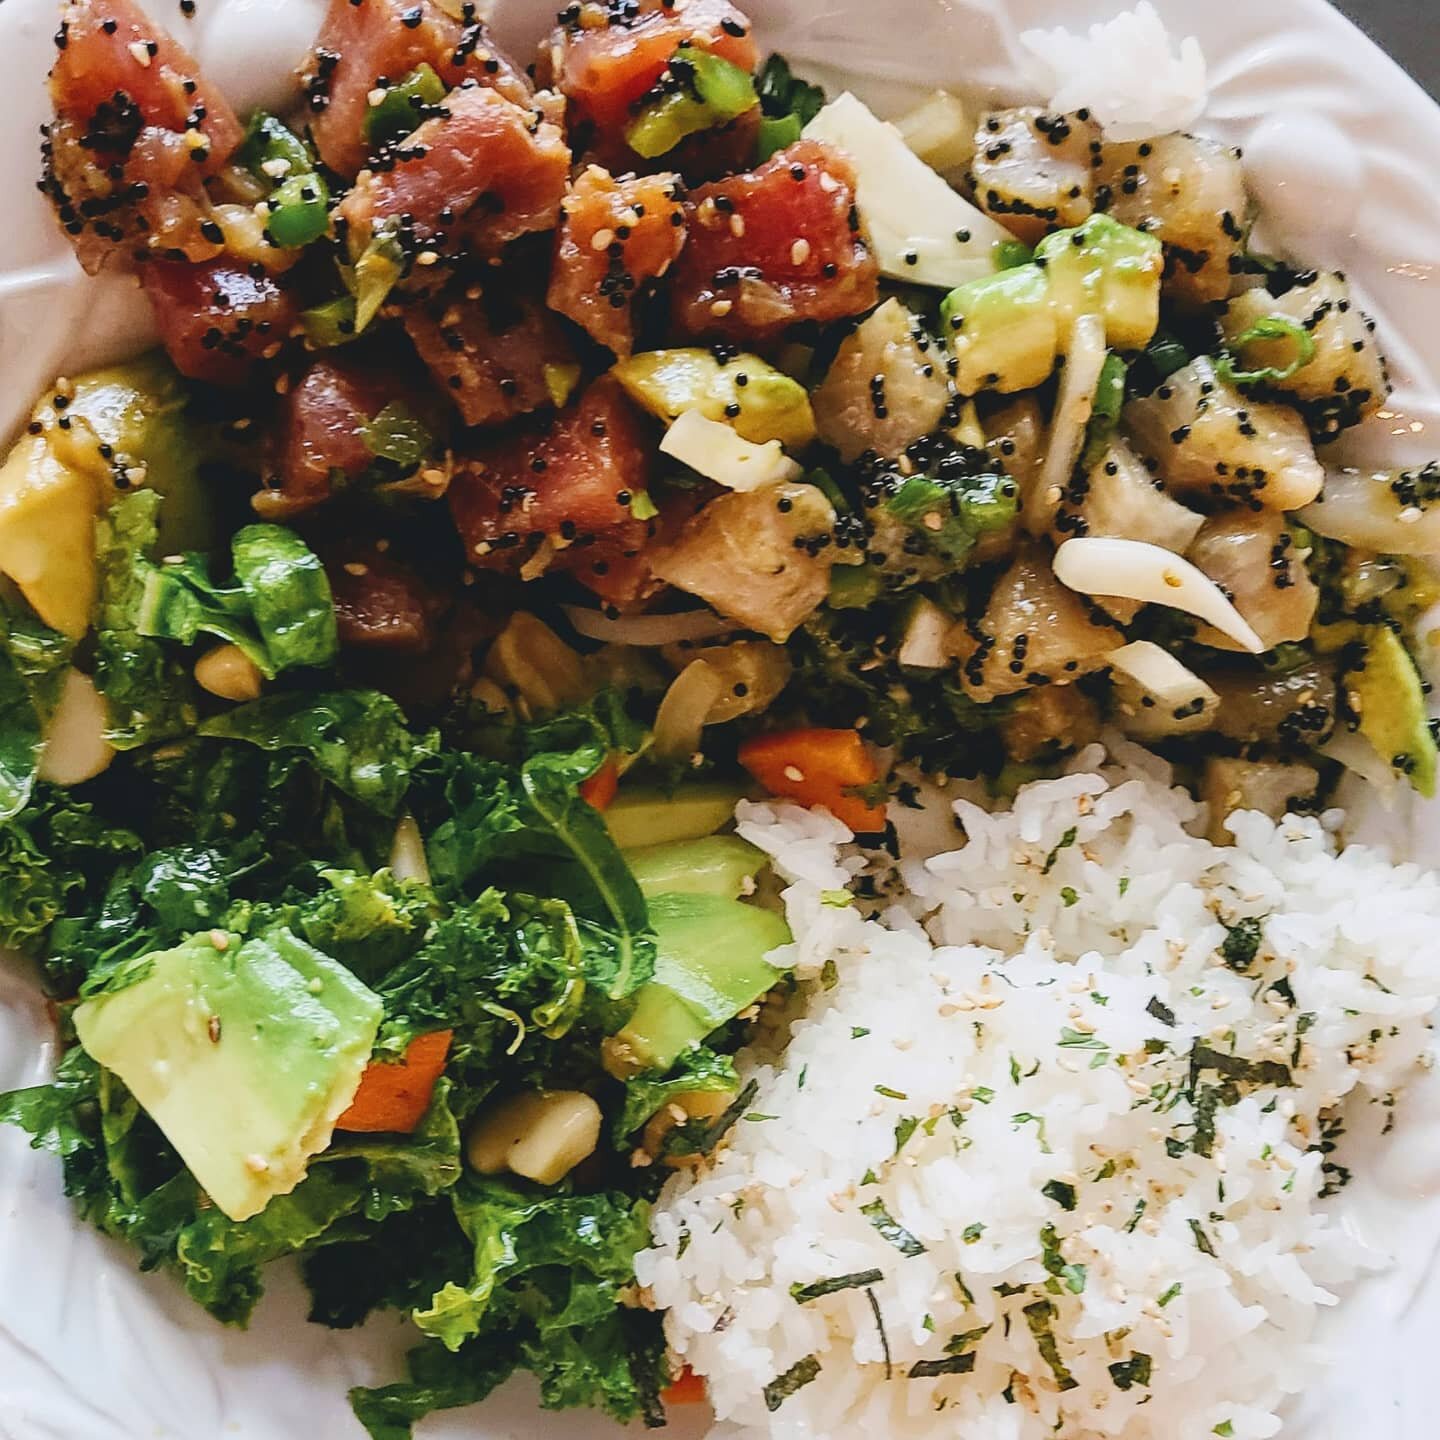 The stars have aligned! Hamachi AND Fresh Big Eye are ON right now in ATX. If you haven't tried either of these delicacies (you can only get at Poke-Poke).. do yourself a favor and order both. 

#freshfish #realpoke #atxfood #austinfoodstagram #foodp